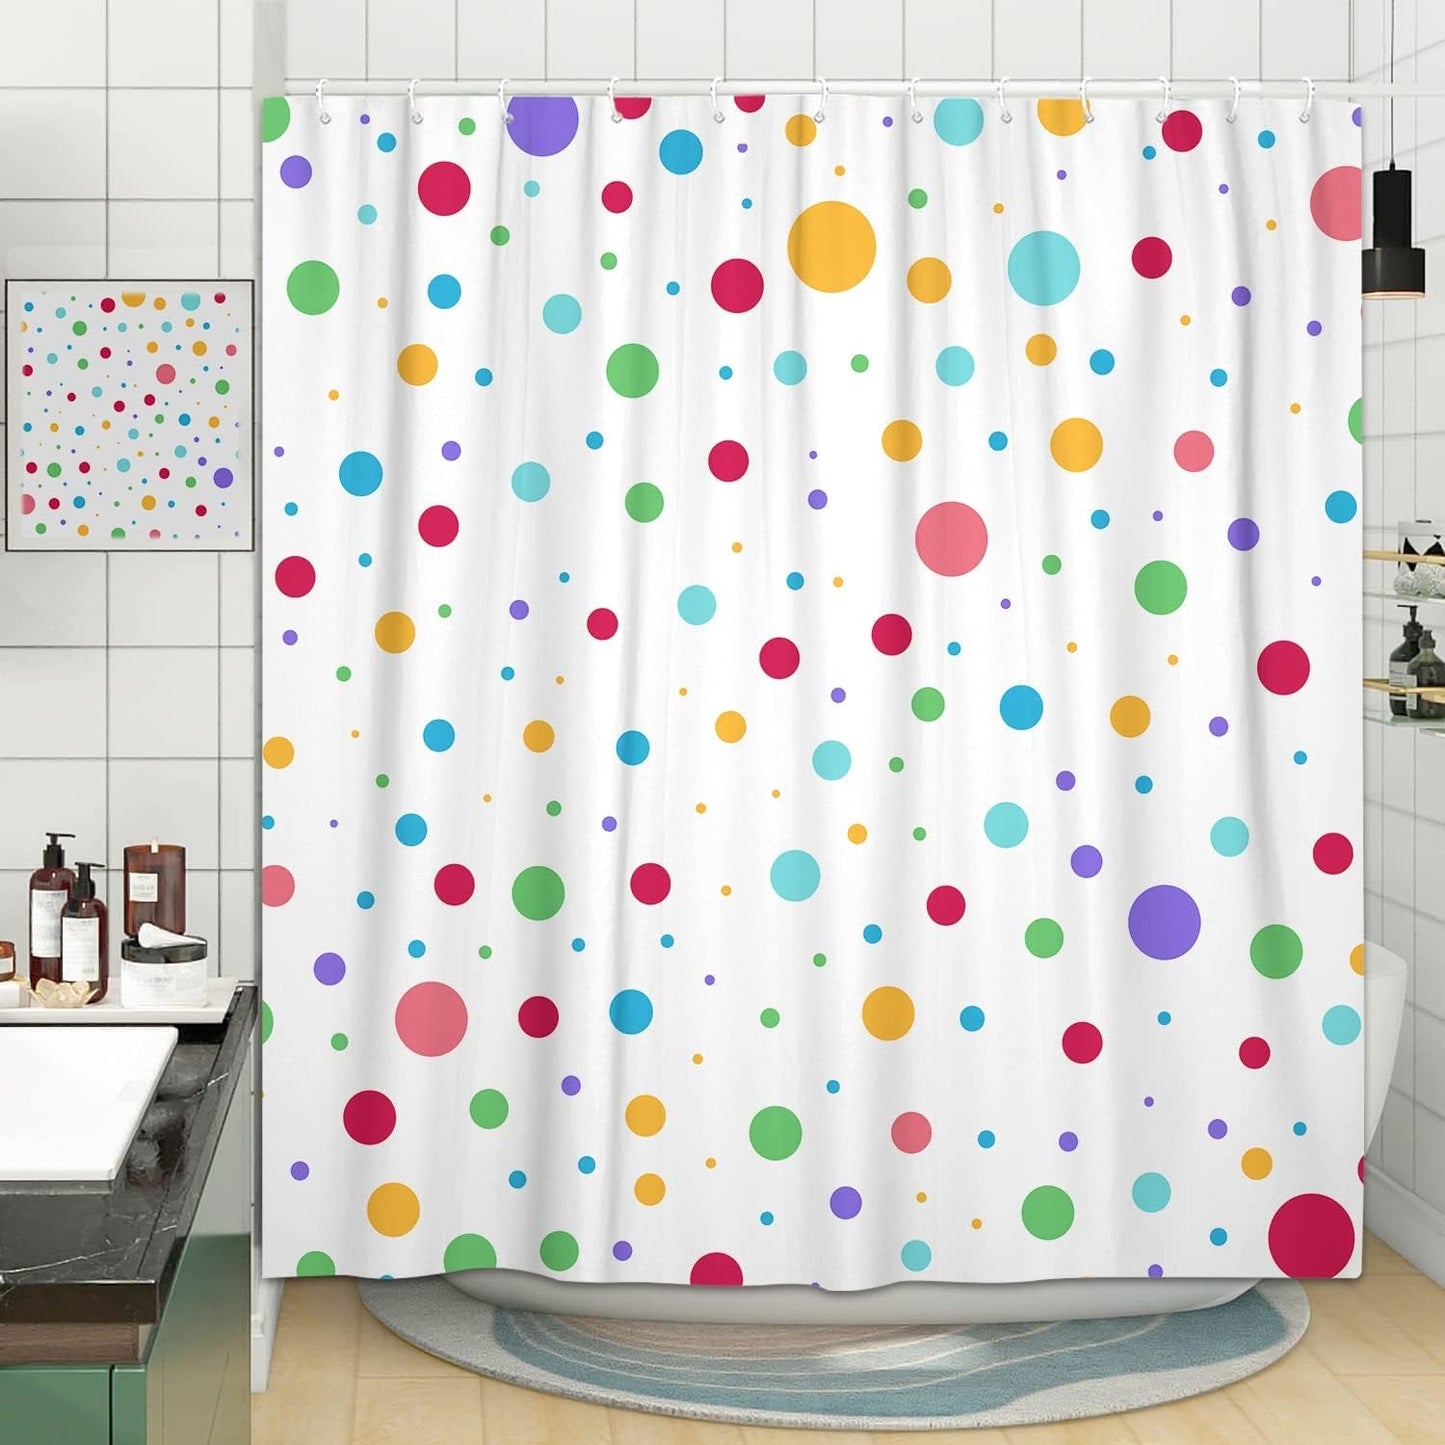 Kids Rainbow Shower Curtain for Bathroom, Colorful Geometric Cute Polka Dot Fabric Shower Curtains Set, White Modern Restroom Decor Accessories with Hooks 72X72Inches